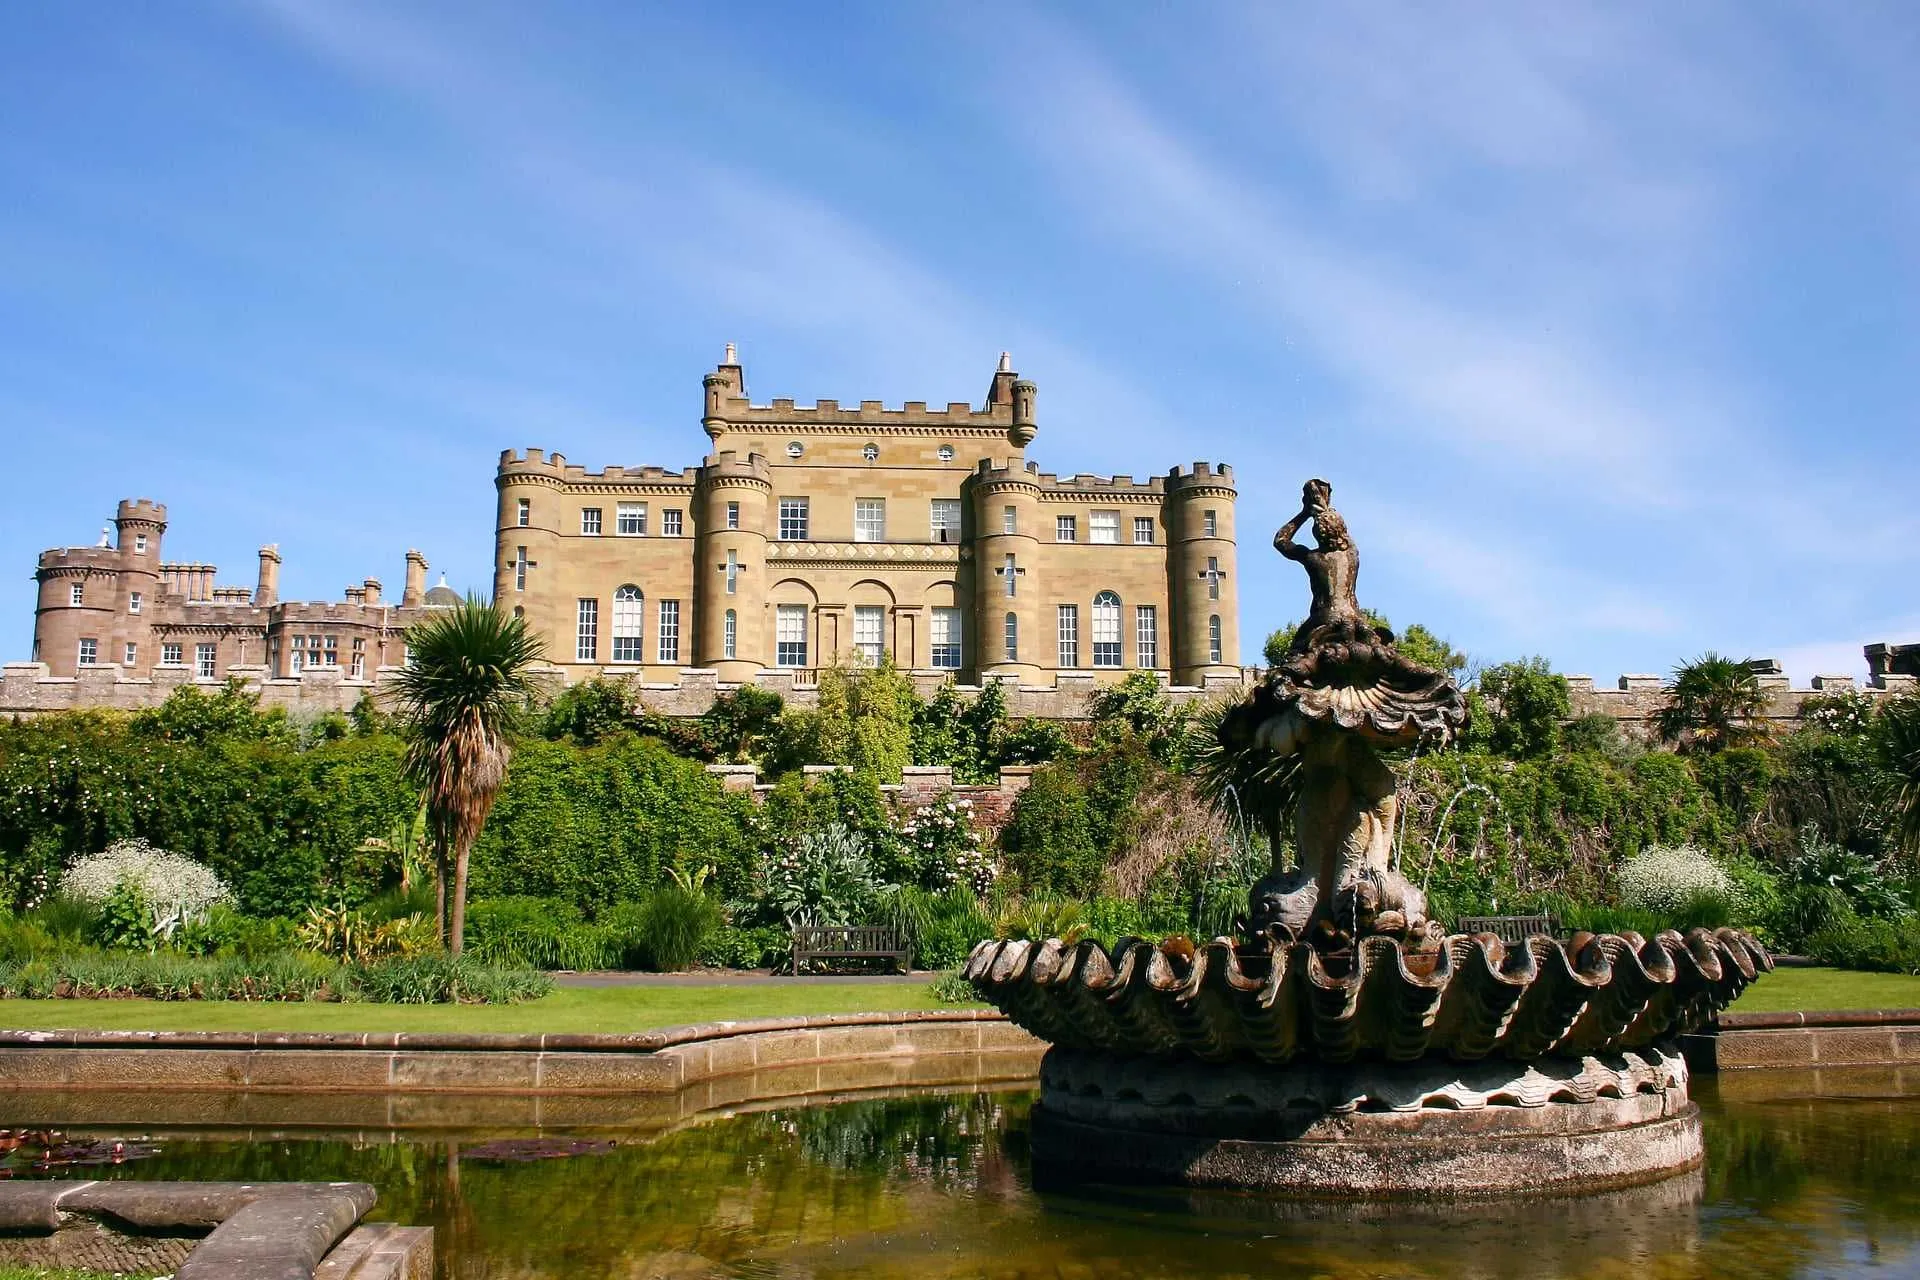 Walk along the most dramatic scenery and nature of Scotland on this tour. Buy Culzean Castle day trip from Glasgow tickets.